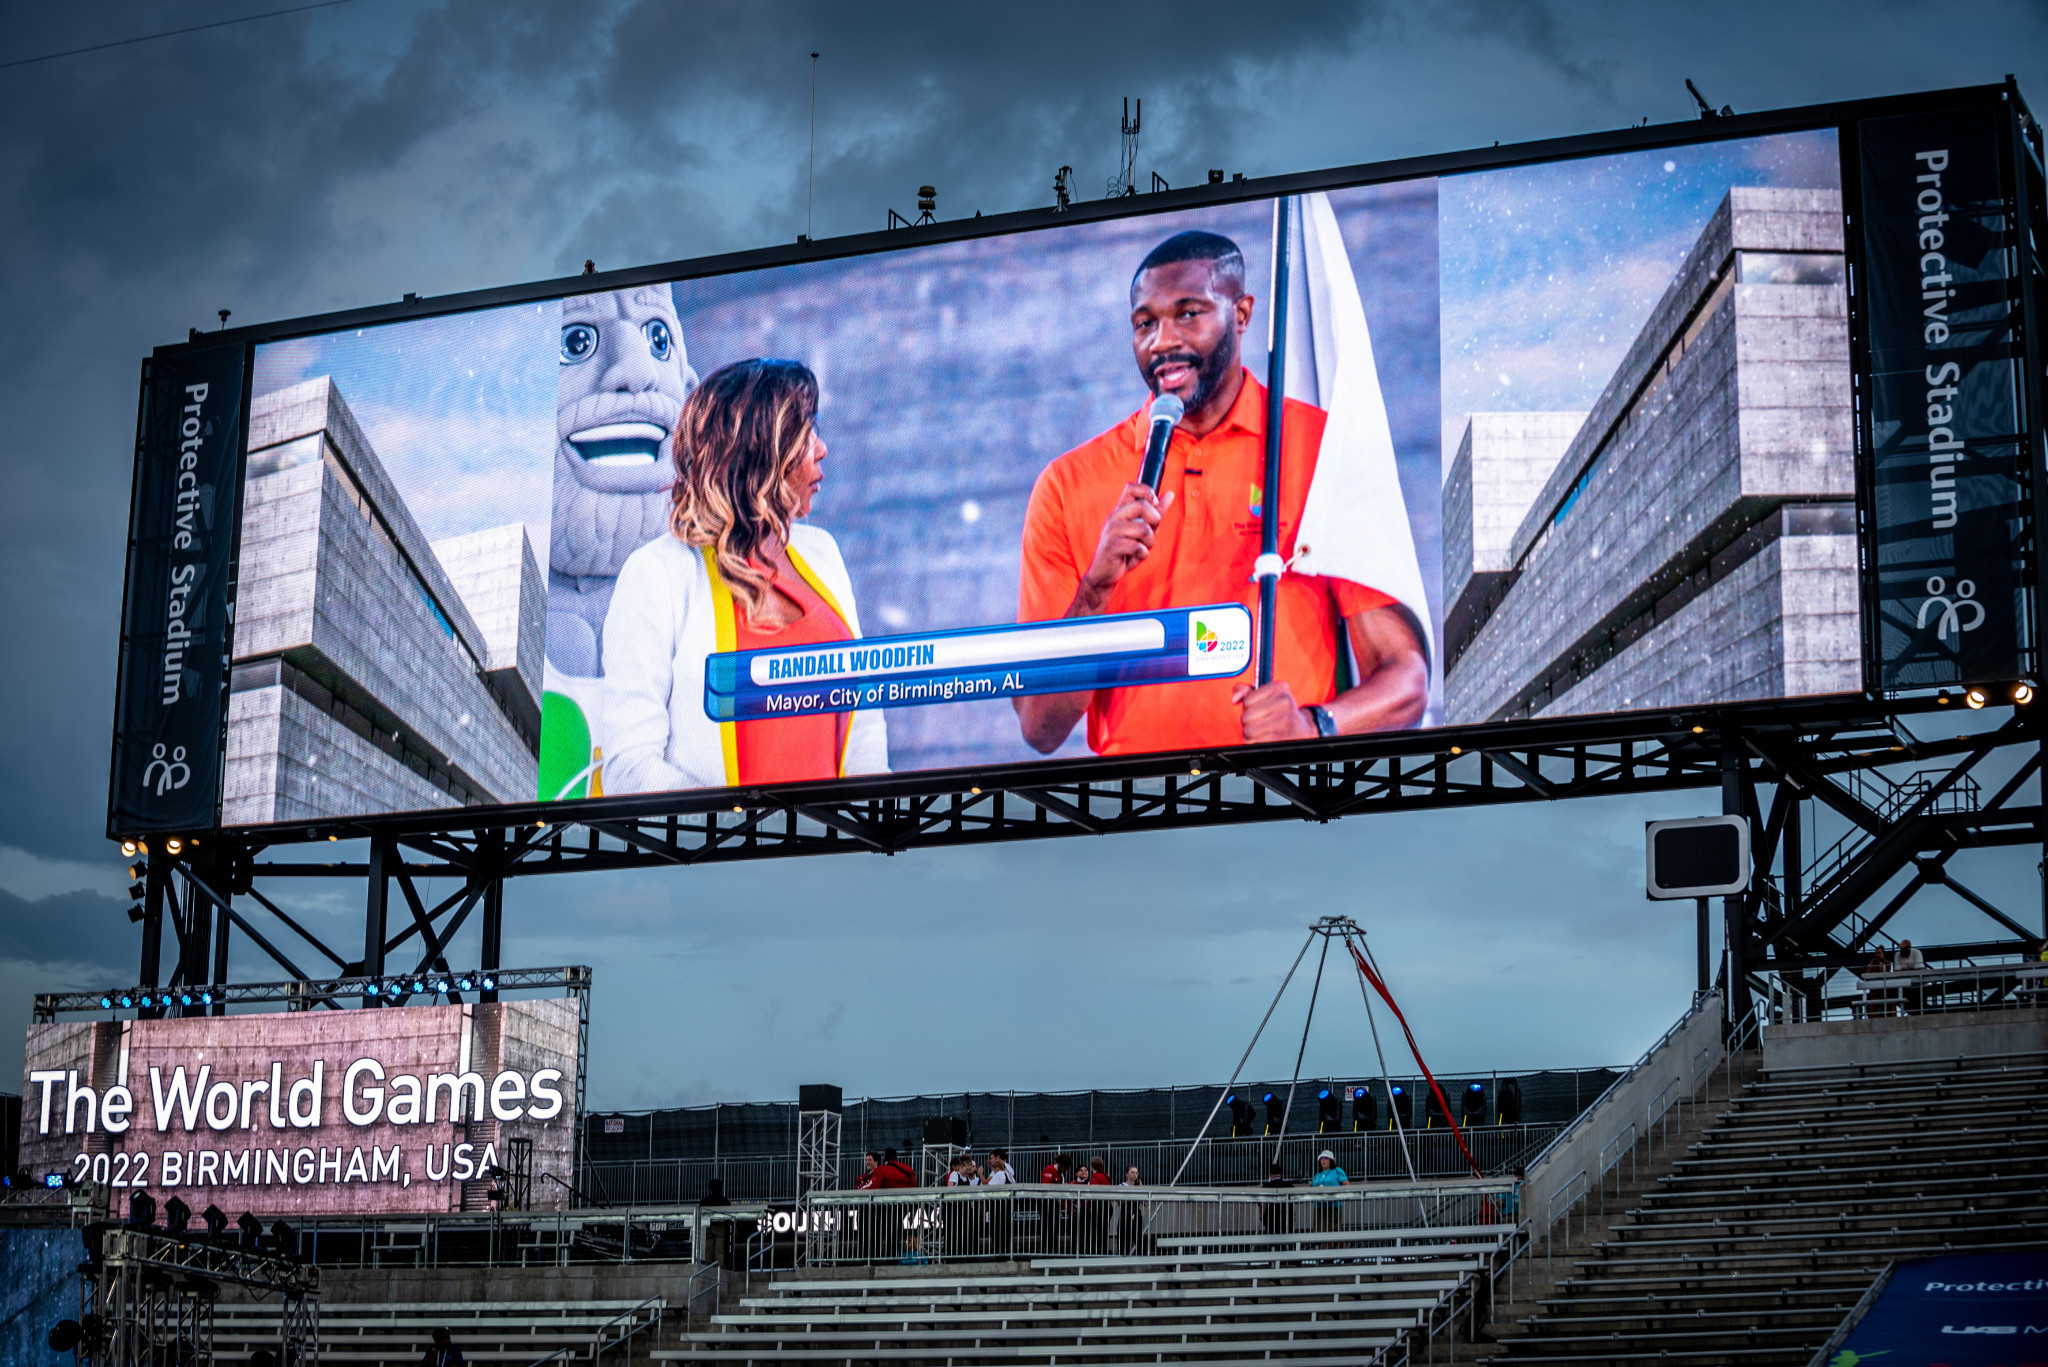 Birmingham Mayor Randall Woodfin addressed athletes and spectators during the Opening Ceremony ©The World Games 2022